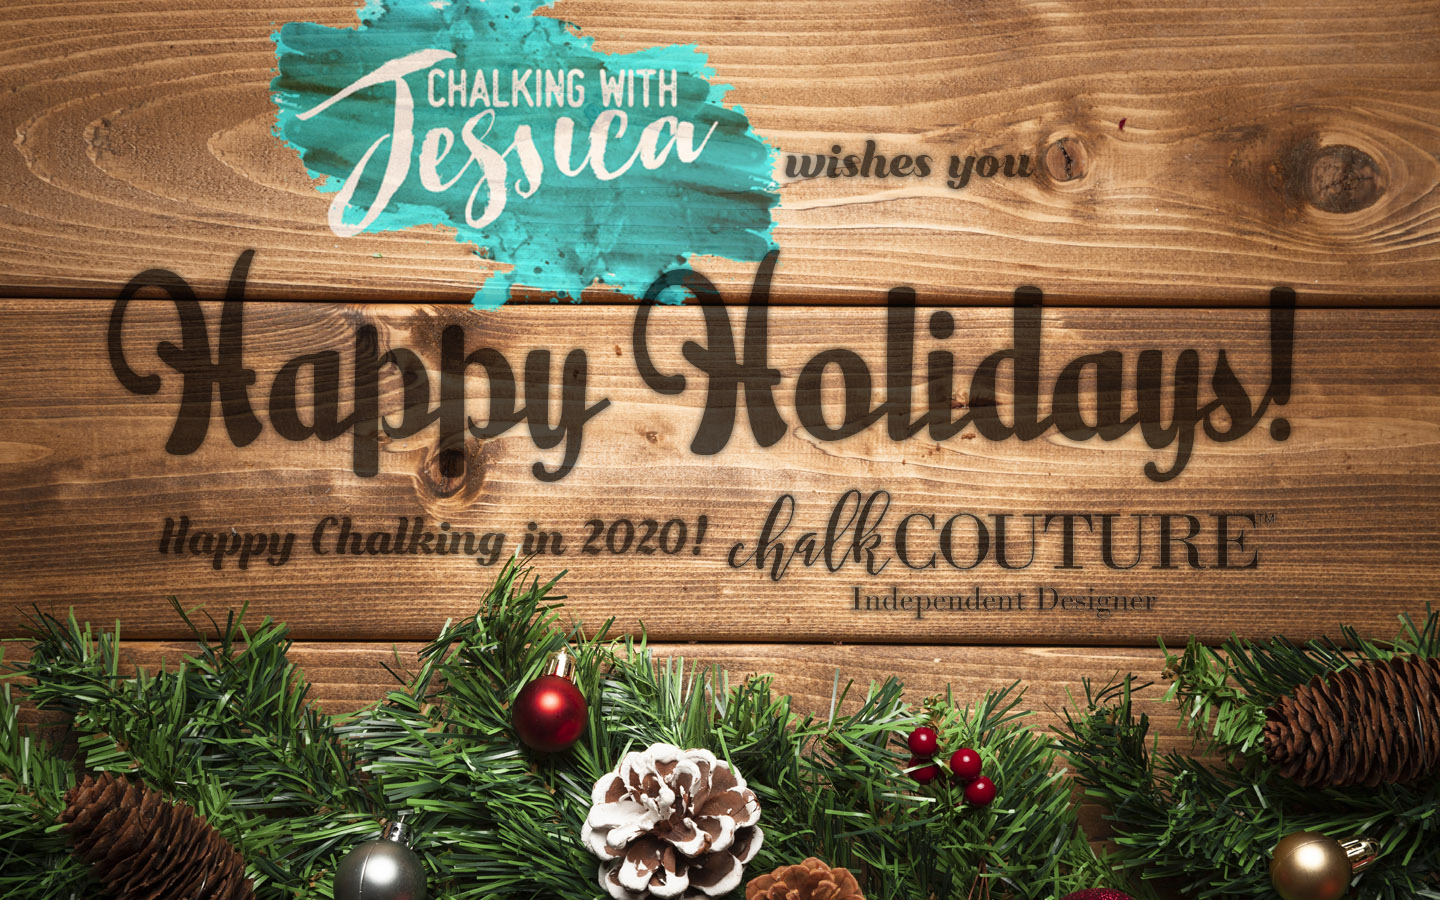 Happy Holidays from Chalking With Jessica!